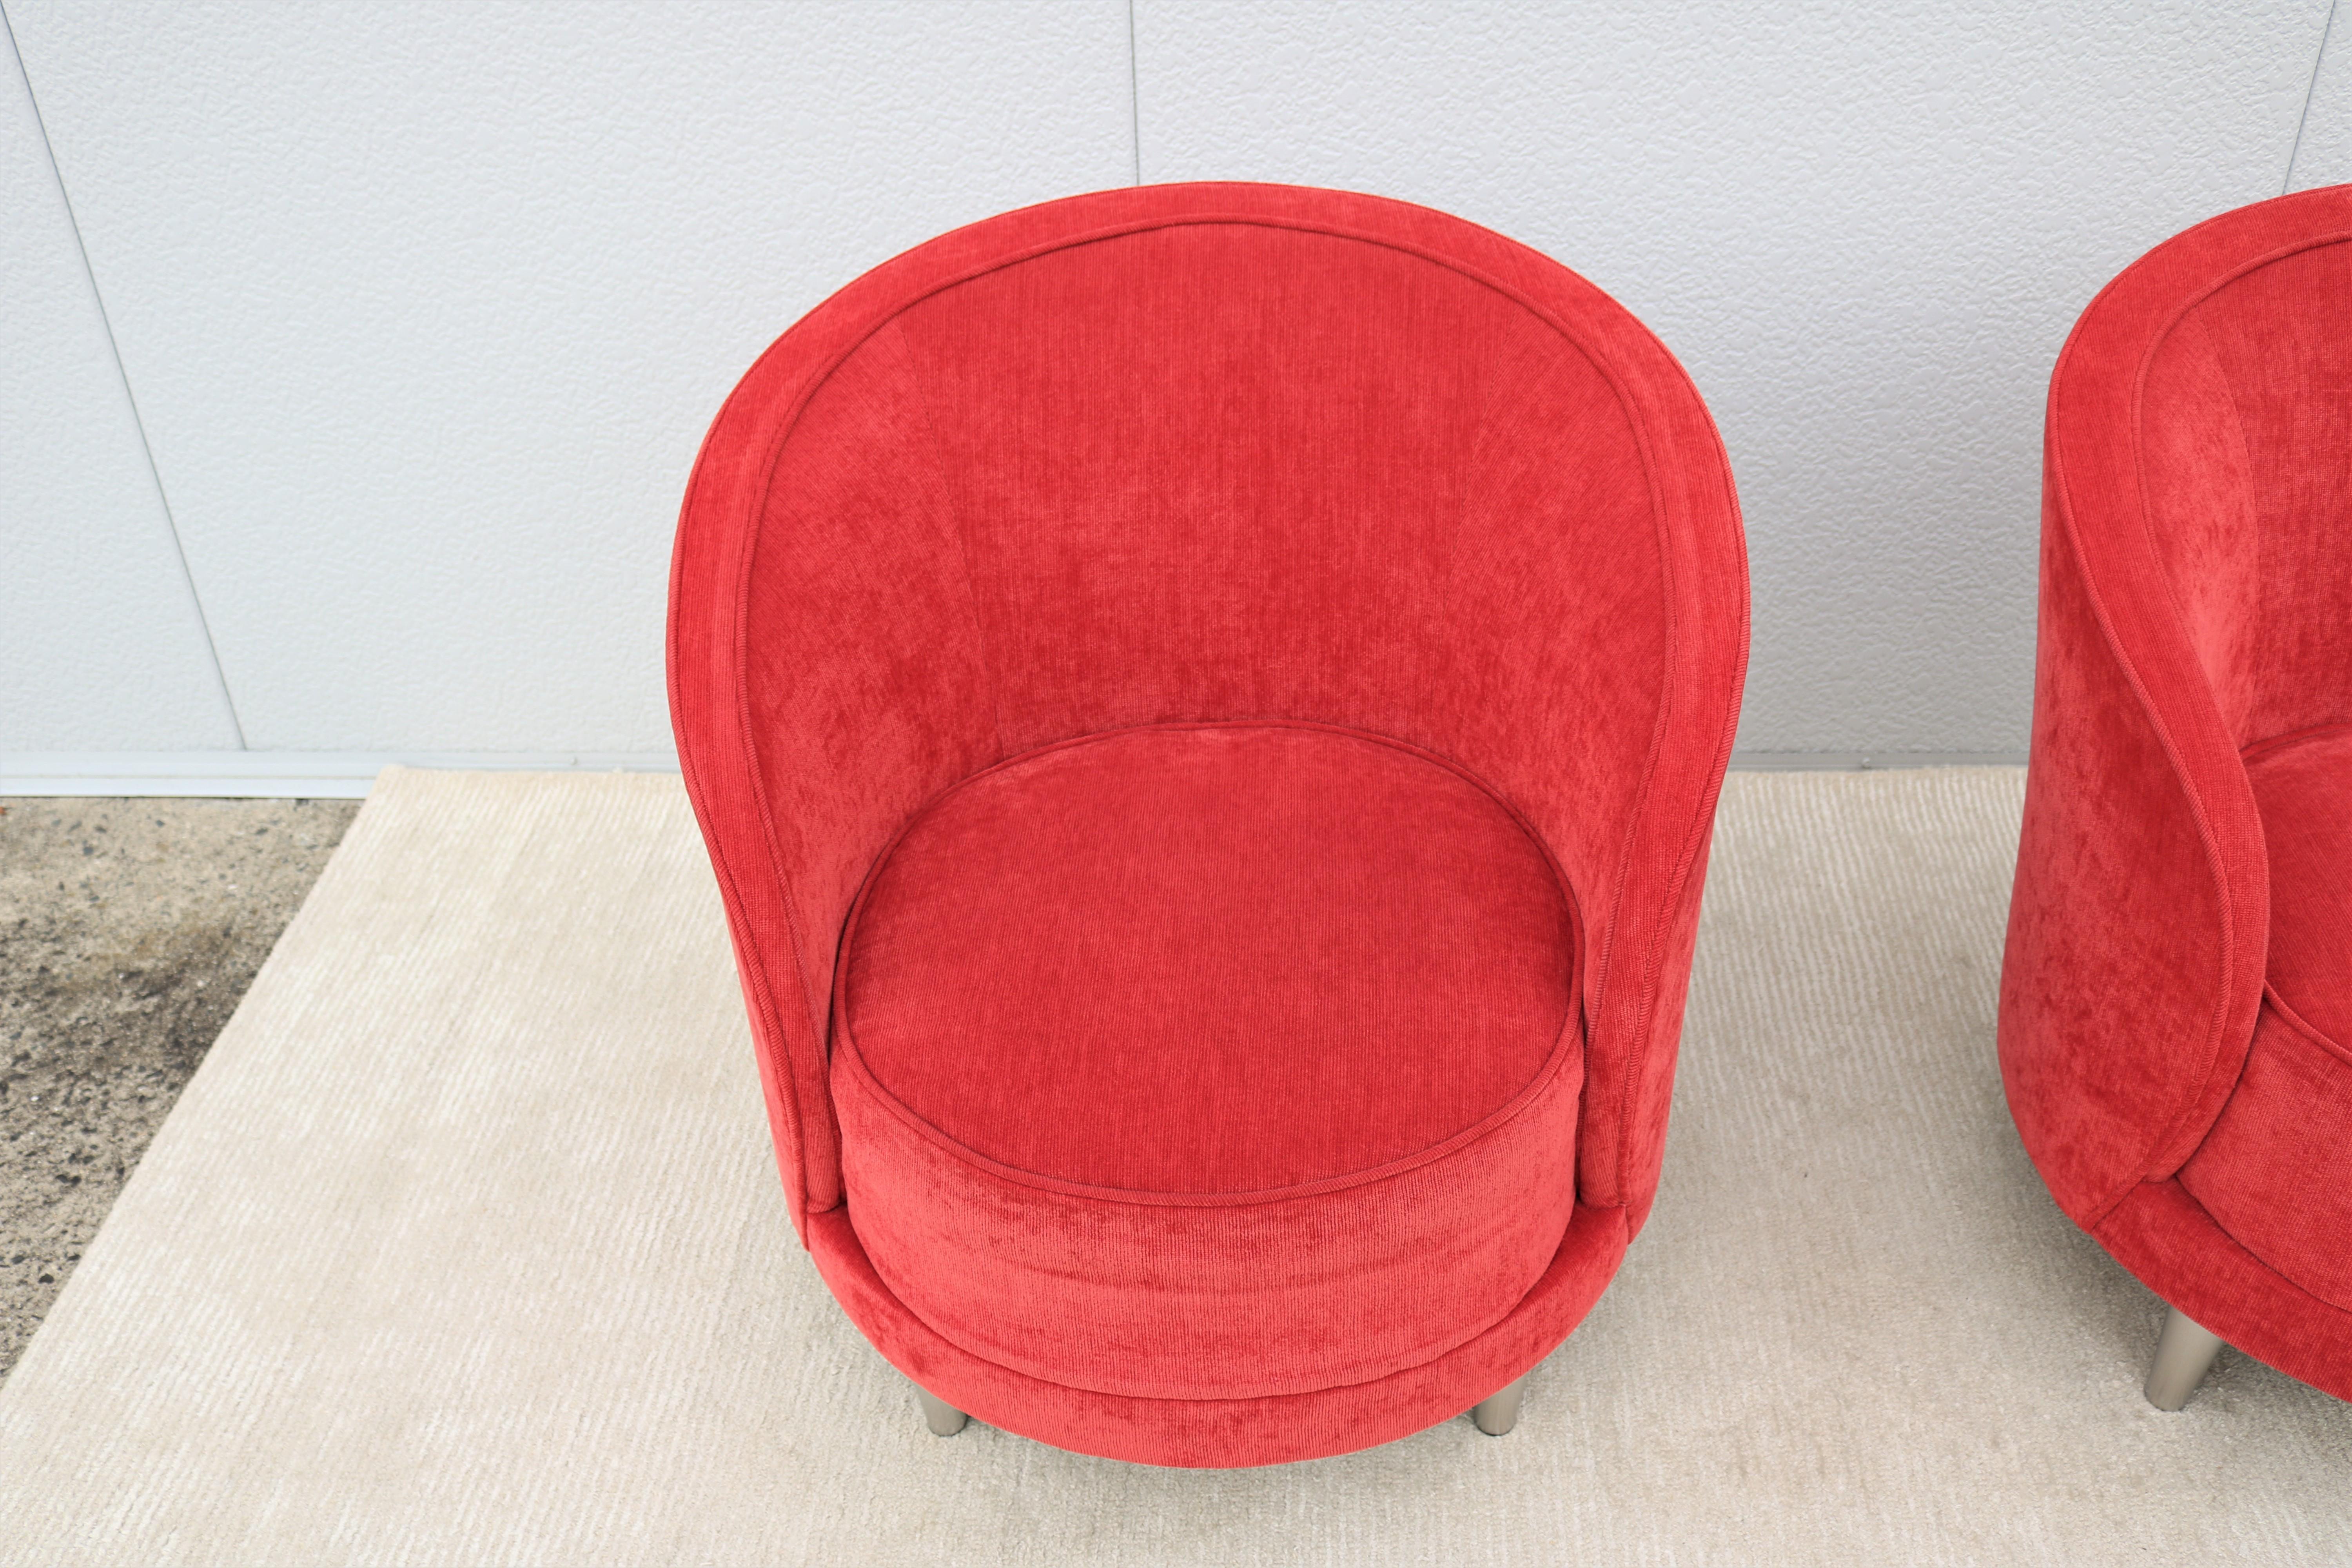 Contemporary Modern Martin Brattrud Kinsale Red Barrel Lounge Chairs, a Pair For Sale 7